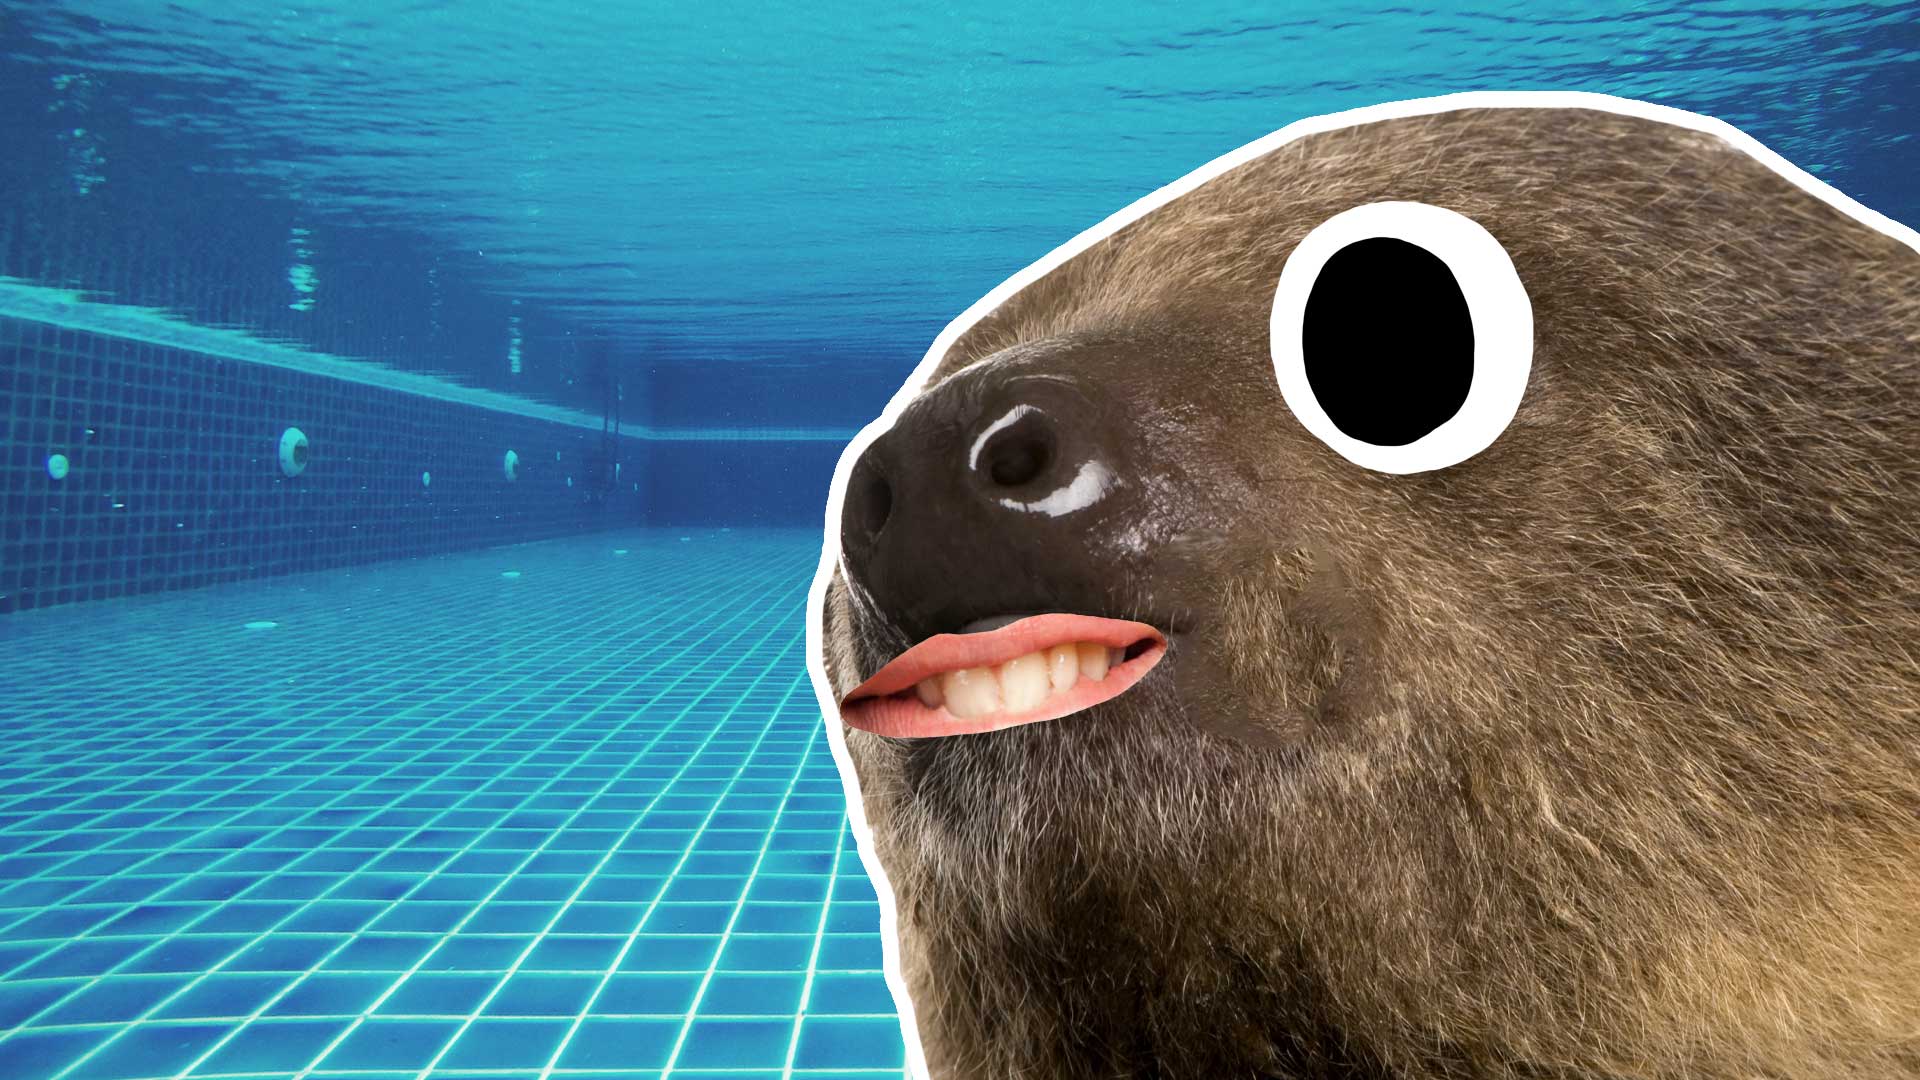 A sloth in a swimming pool